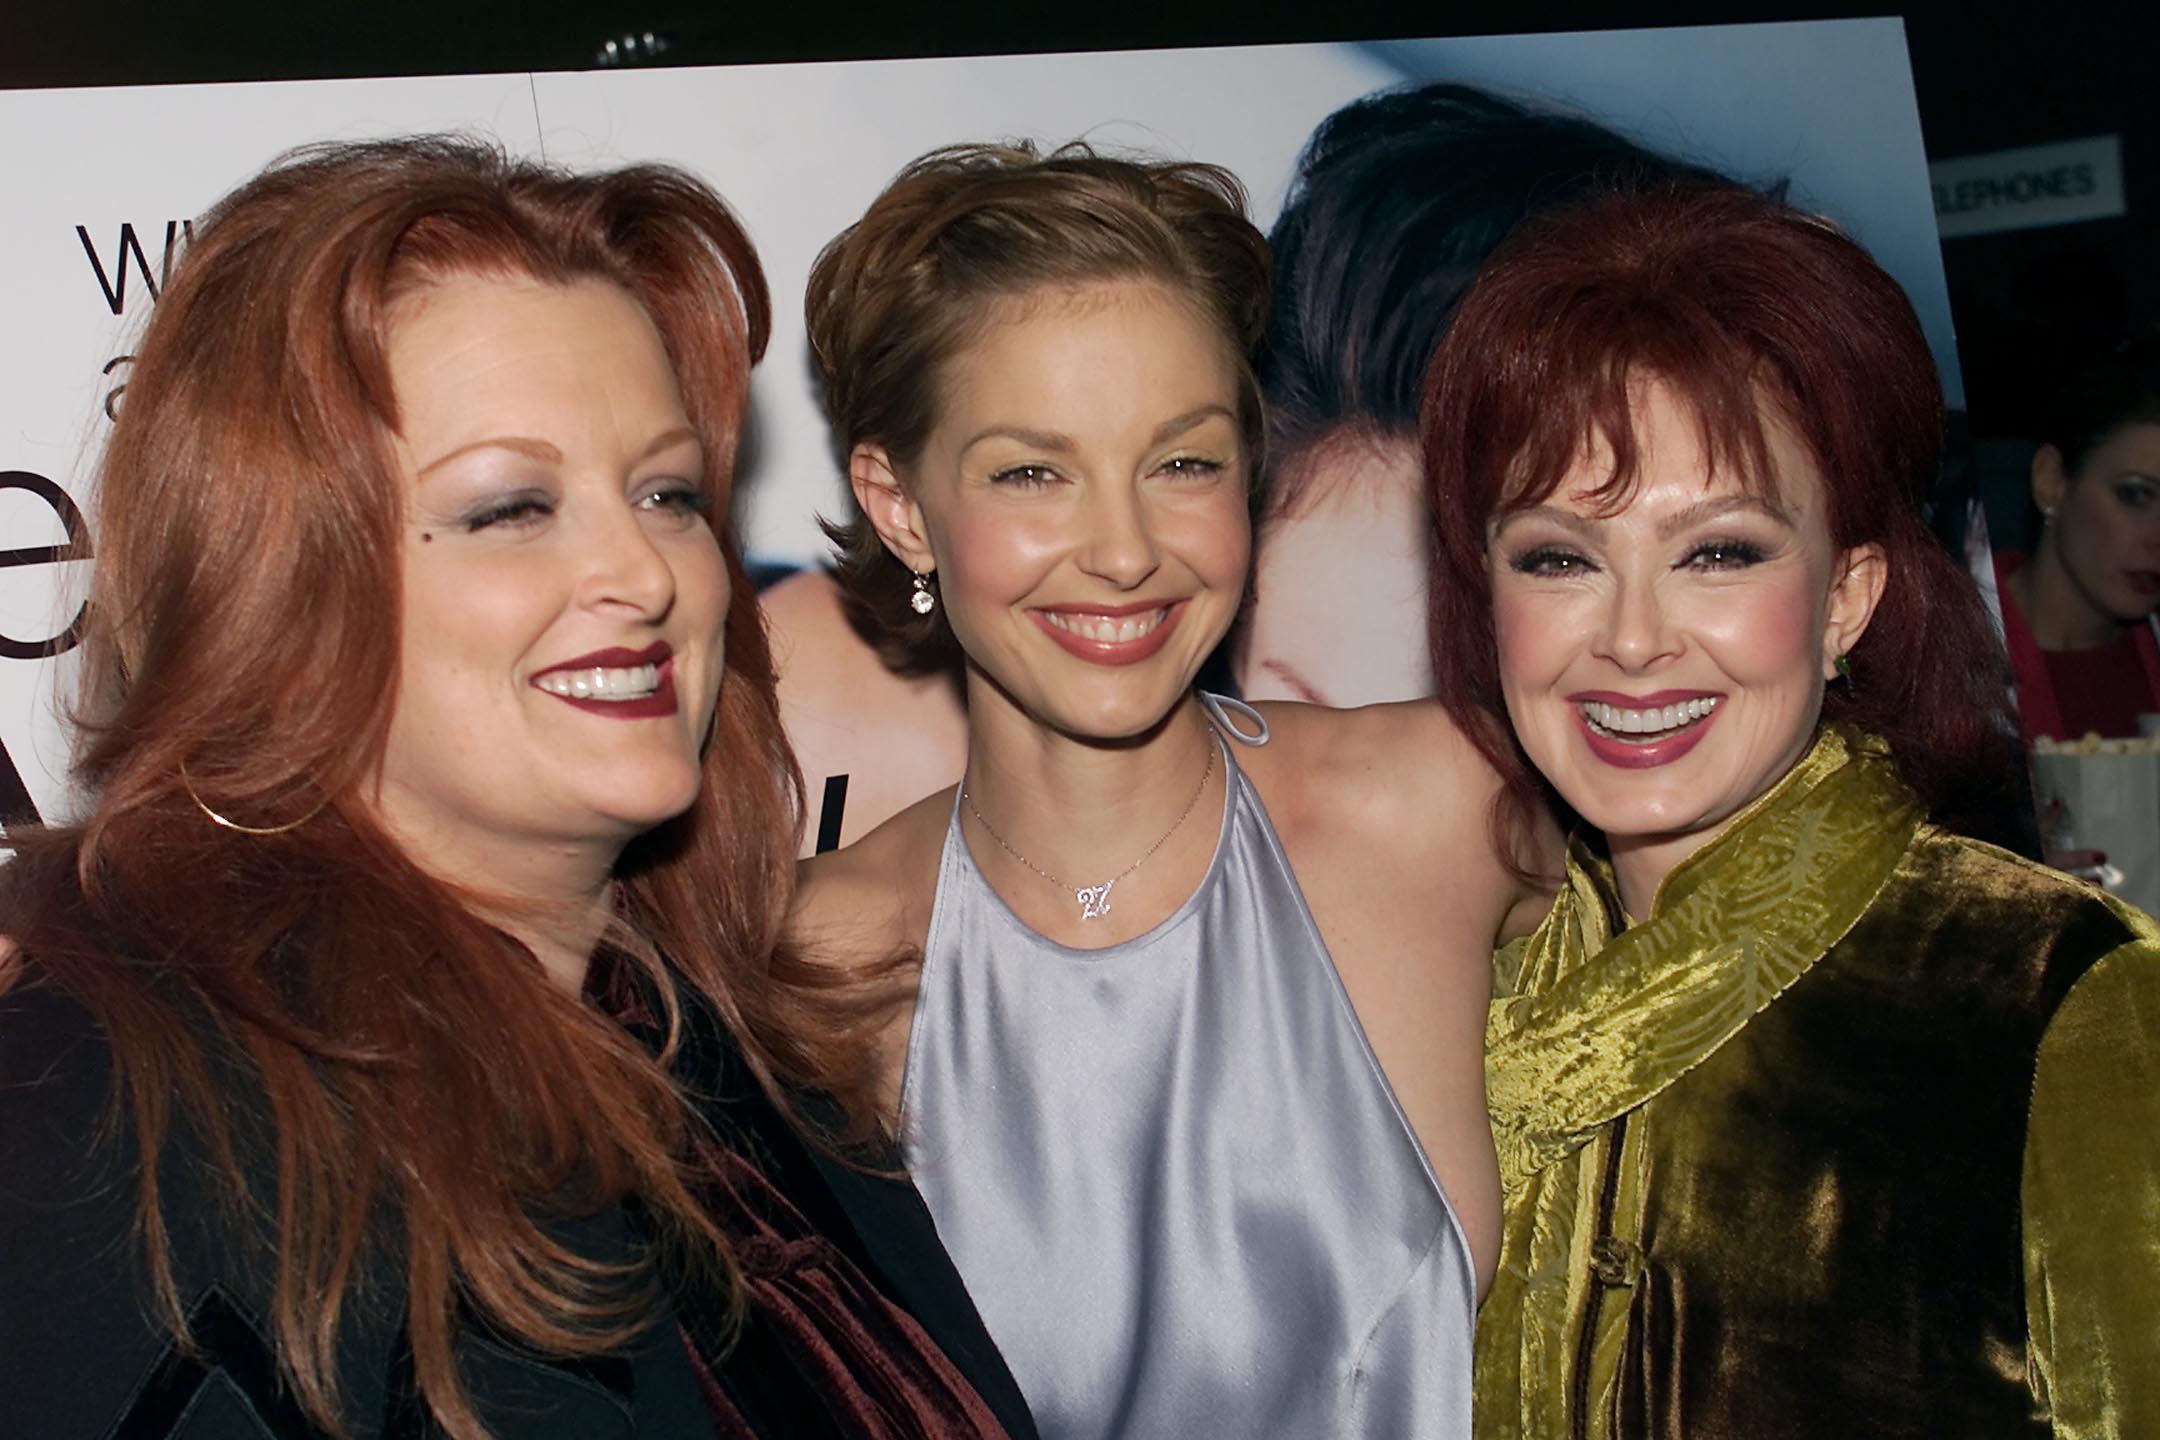 Singer Wynonna Judd, actress Ashely Judd with their mother, country singer Naomi Judd at the premiere of "Someone Like You" at the Clearview Chelsea West Theater on March 28, 2001 in New York City. | Source: Getty Images